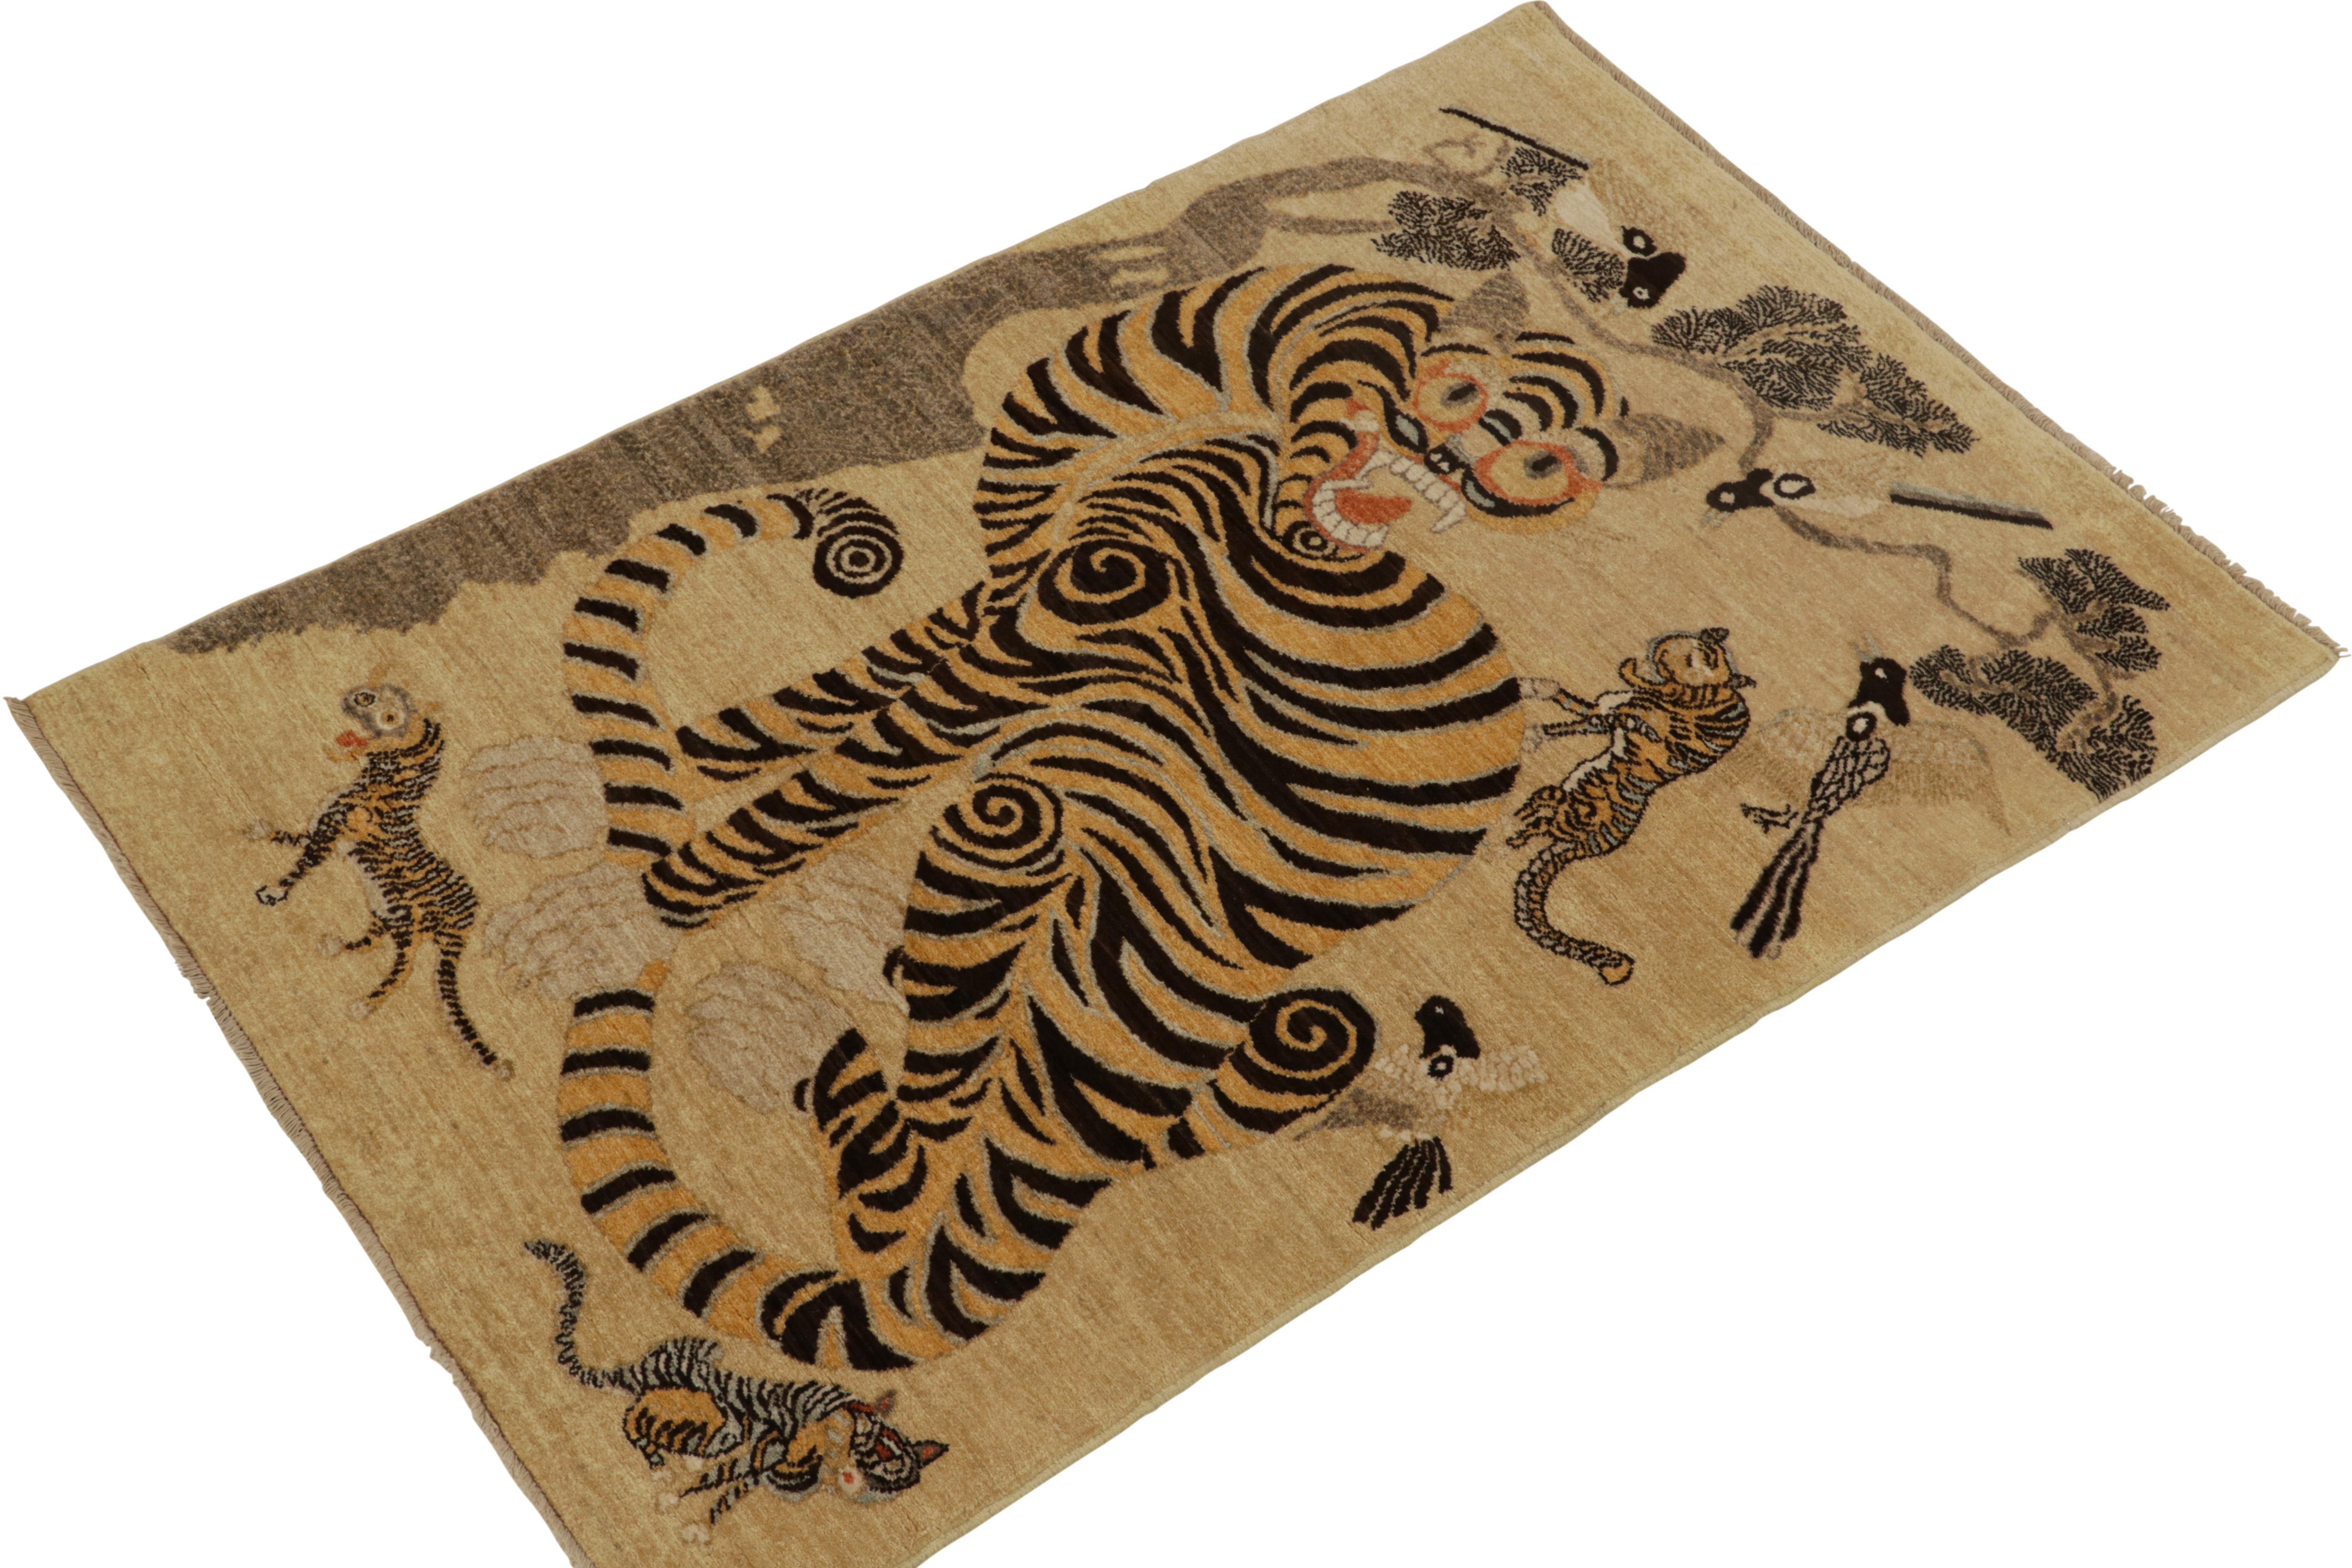 Hand knotted in wool, Rug & Kilim presents this 4x5 addition to the team’s classically inspired Tigers Collection. 

On the Design: This particular work is among those influenced by seldom-seen folk art drawings believed to have never been adapted